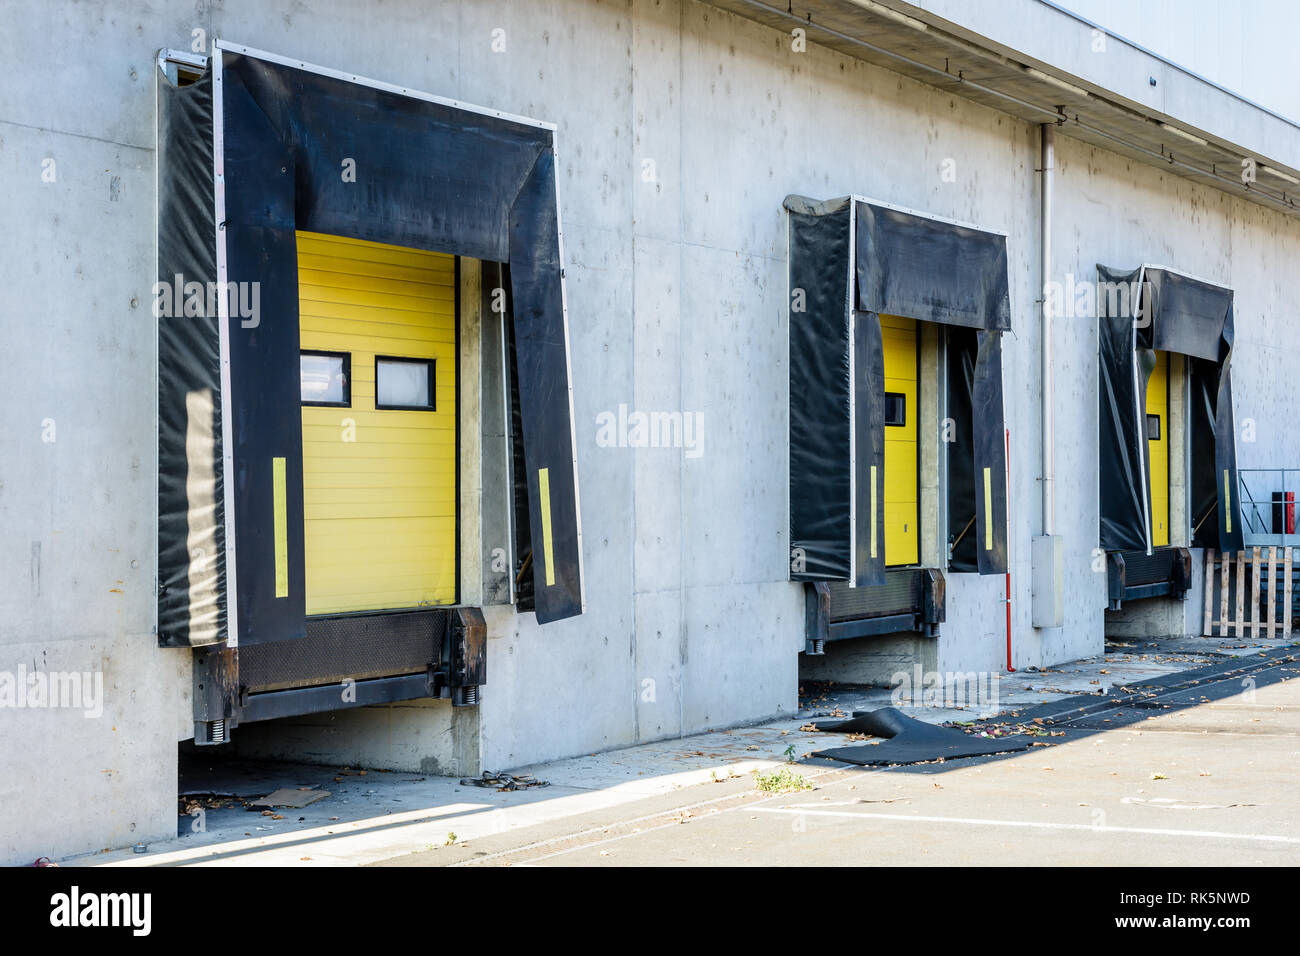 Three truck loading docks with rubber seals in the concrete wall of a warehouse with a closed yellow roller shutter door. Stock Photo